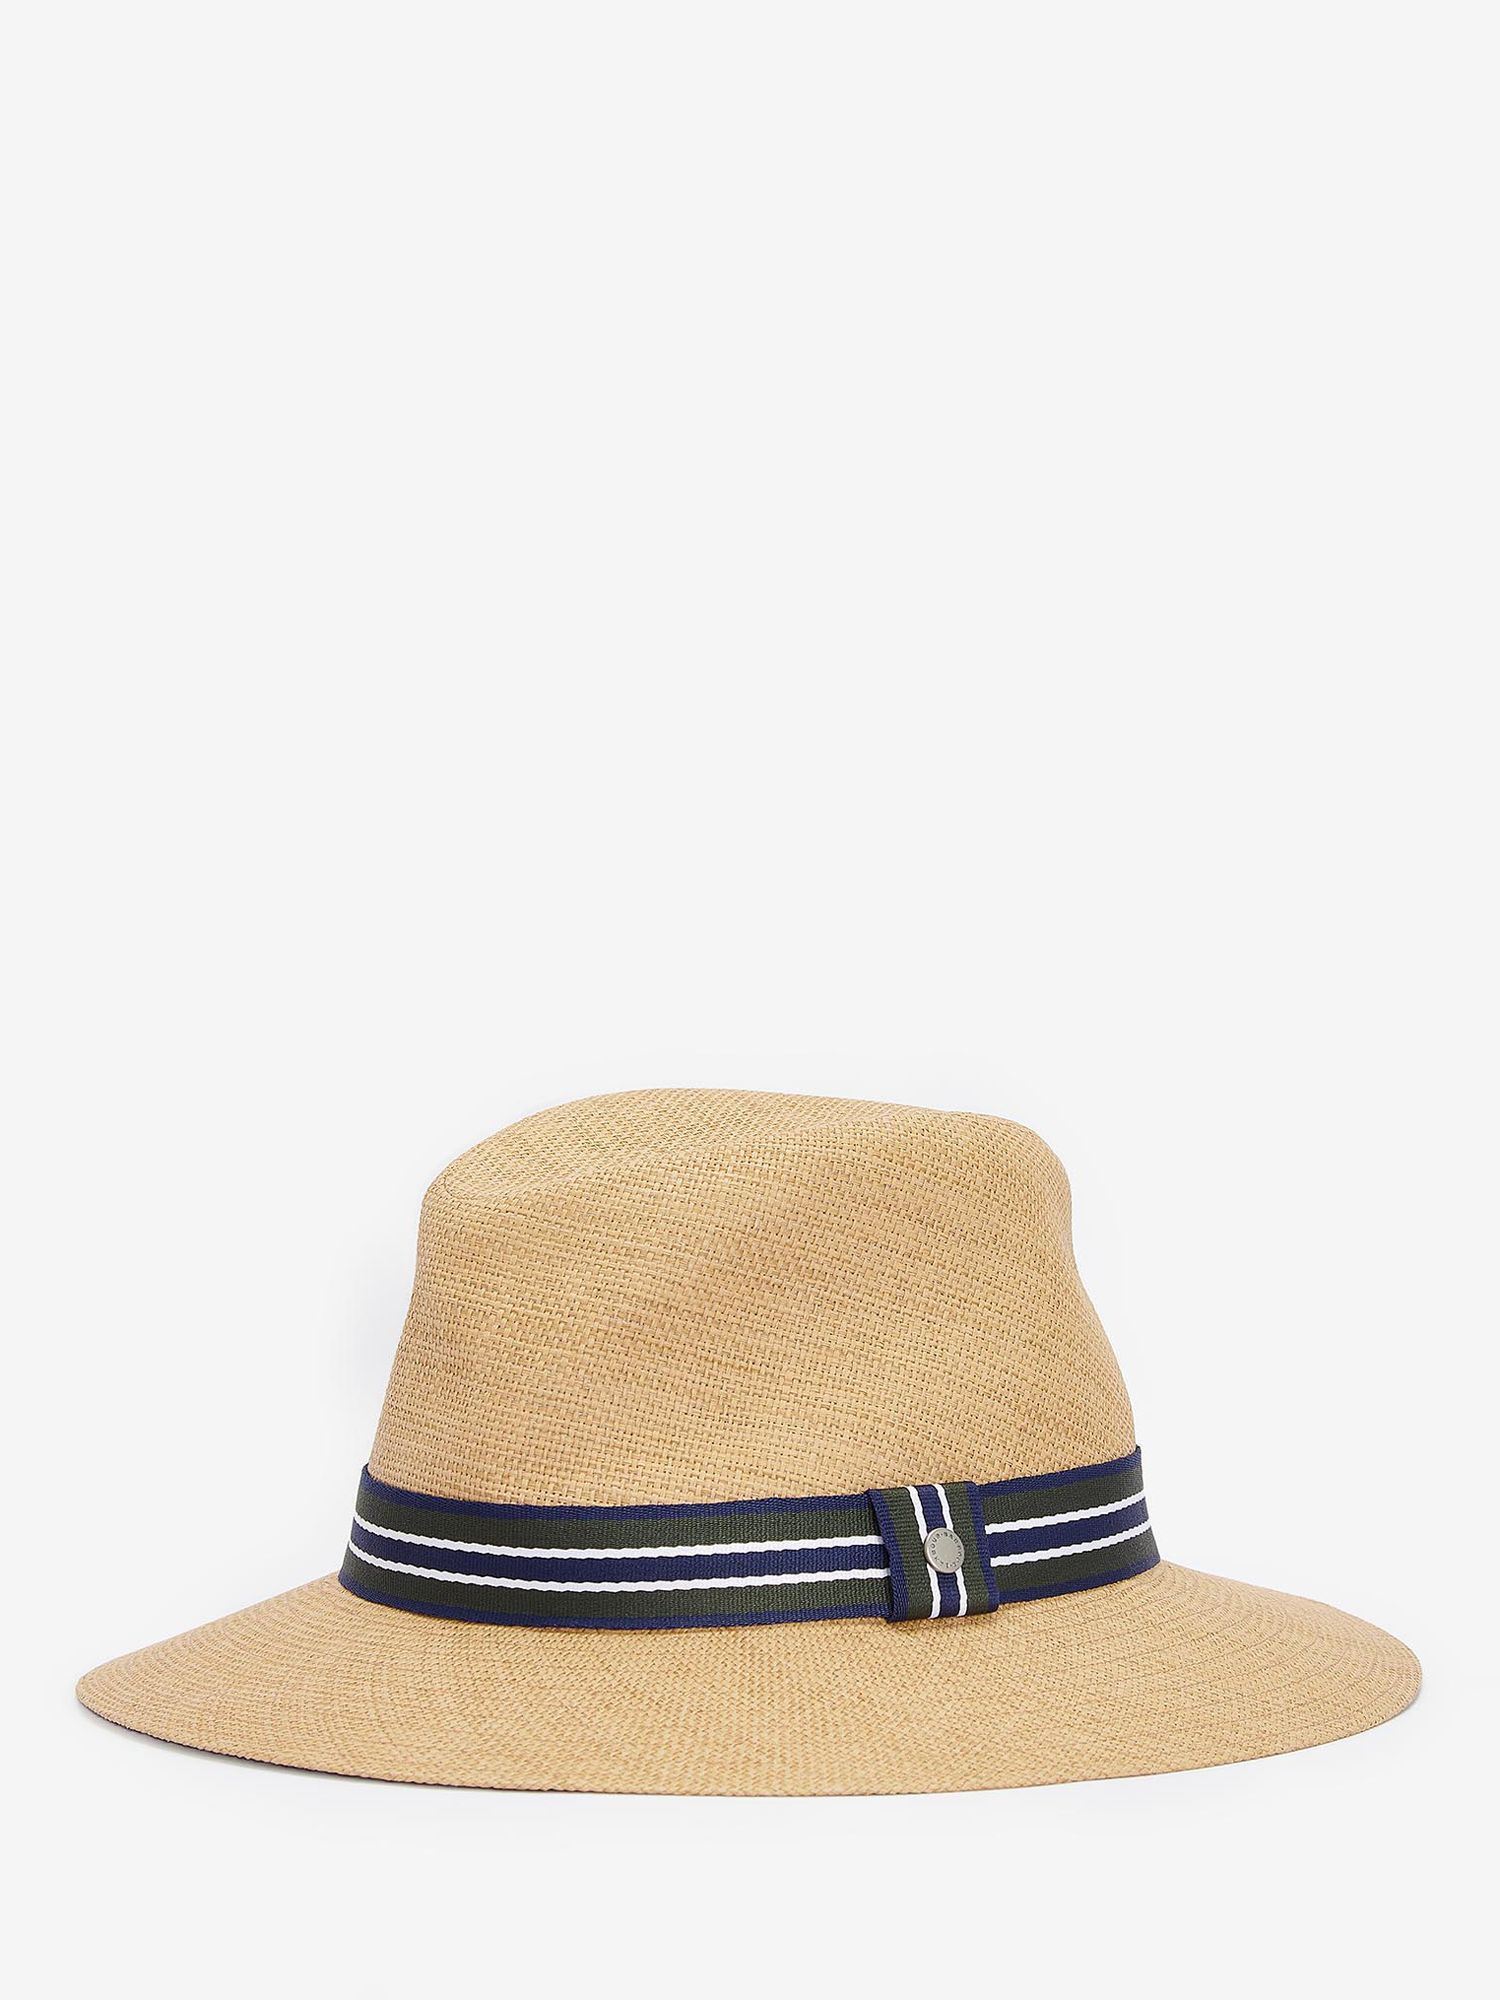 Barbour Rothbury Summer Hat, Tan/Classic, S